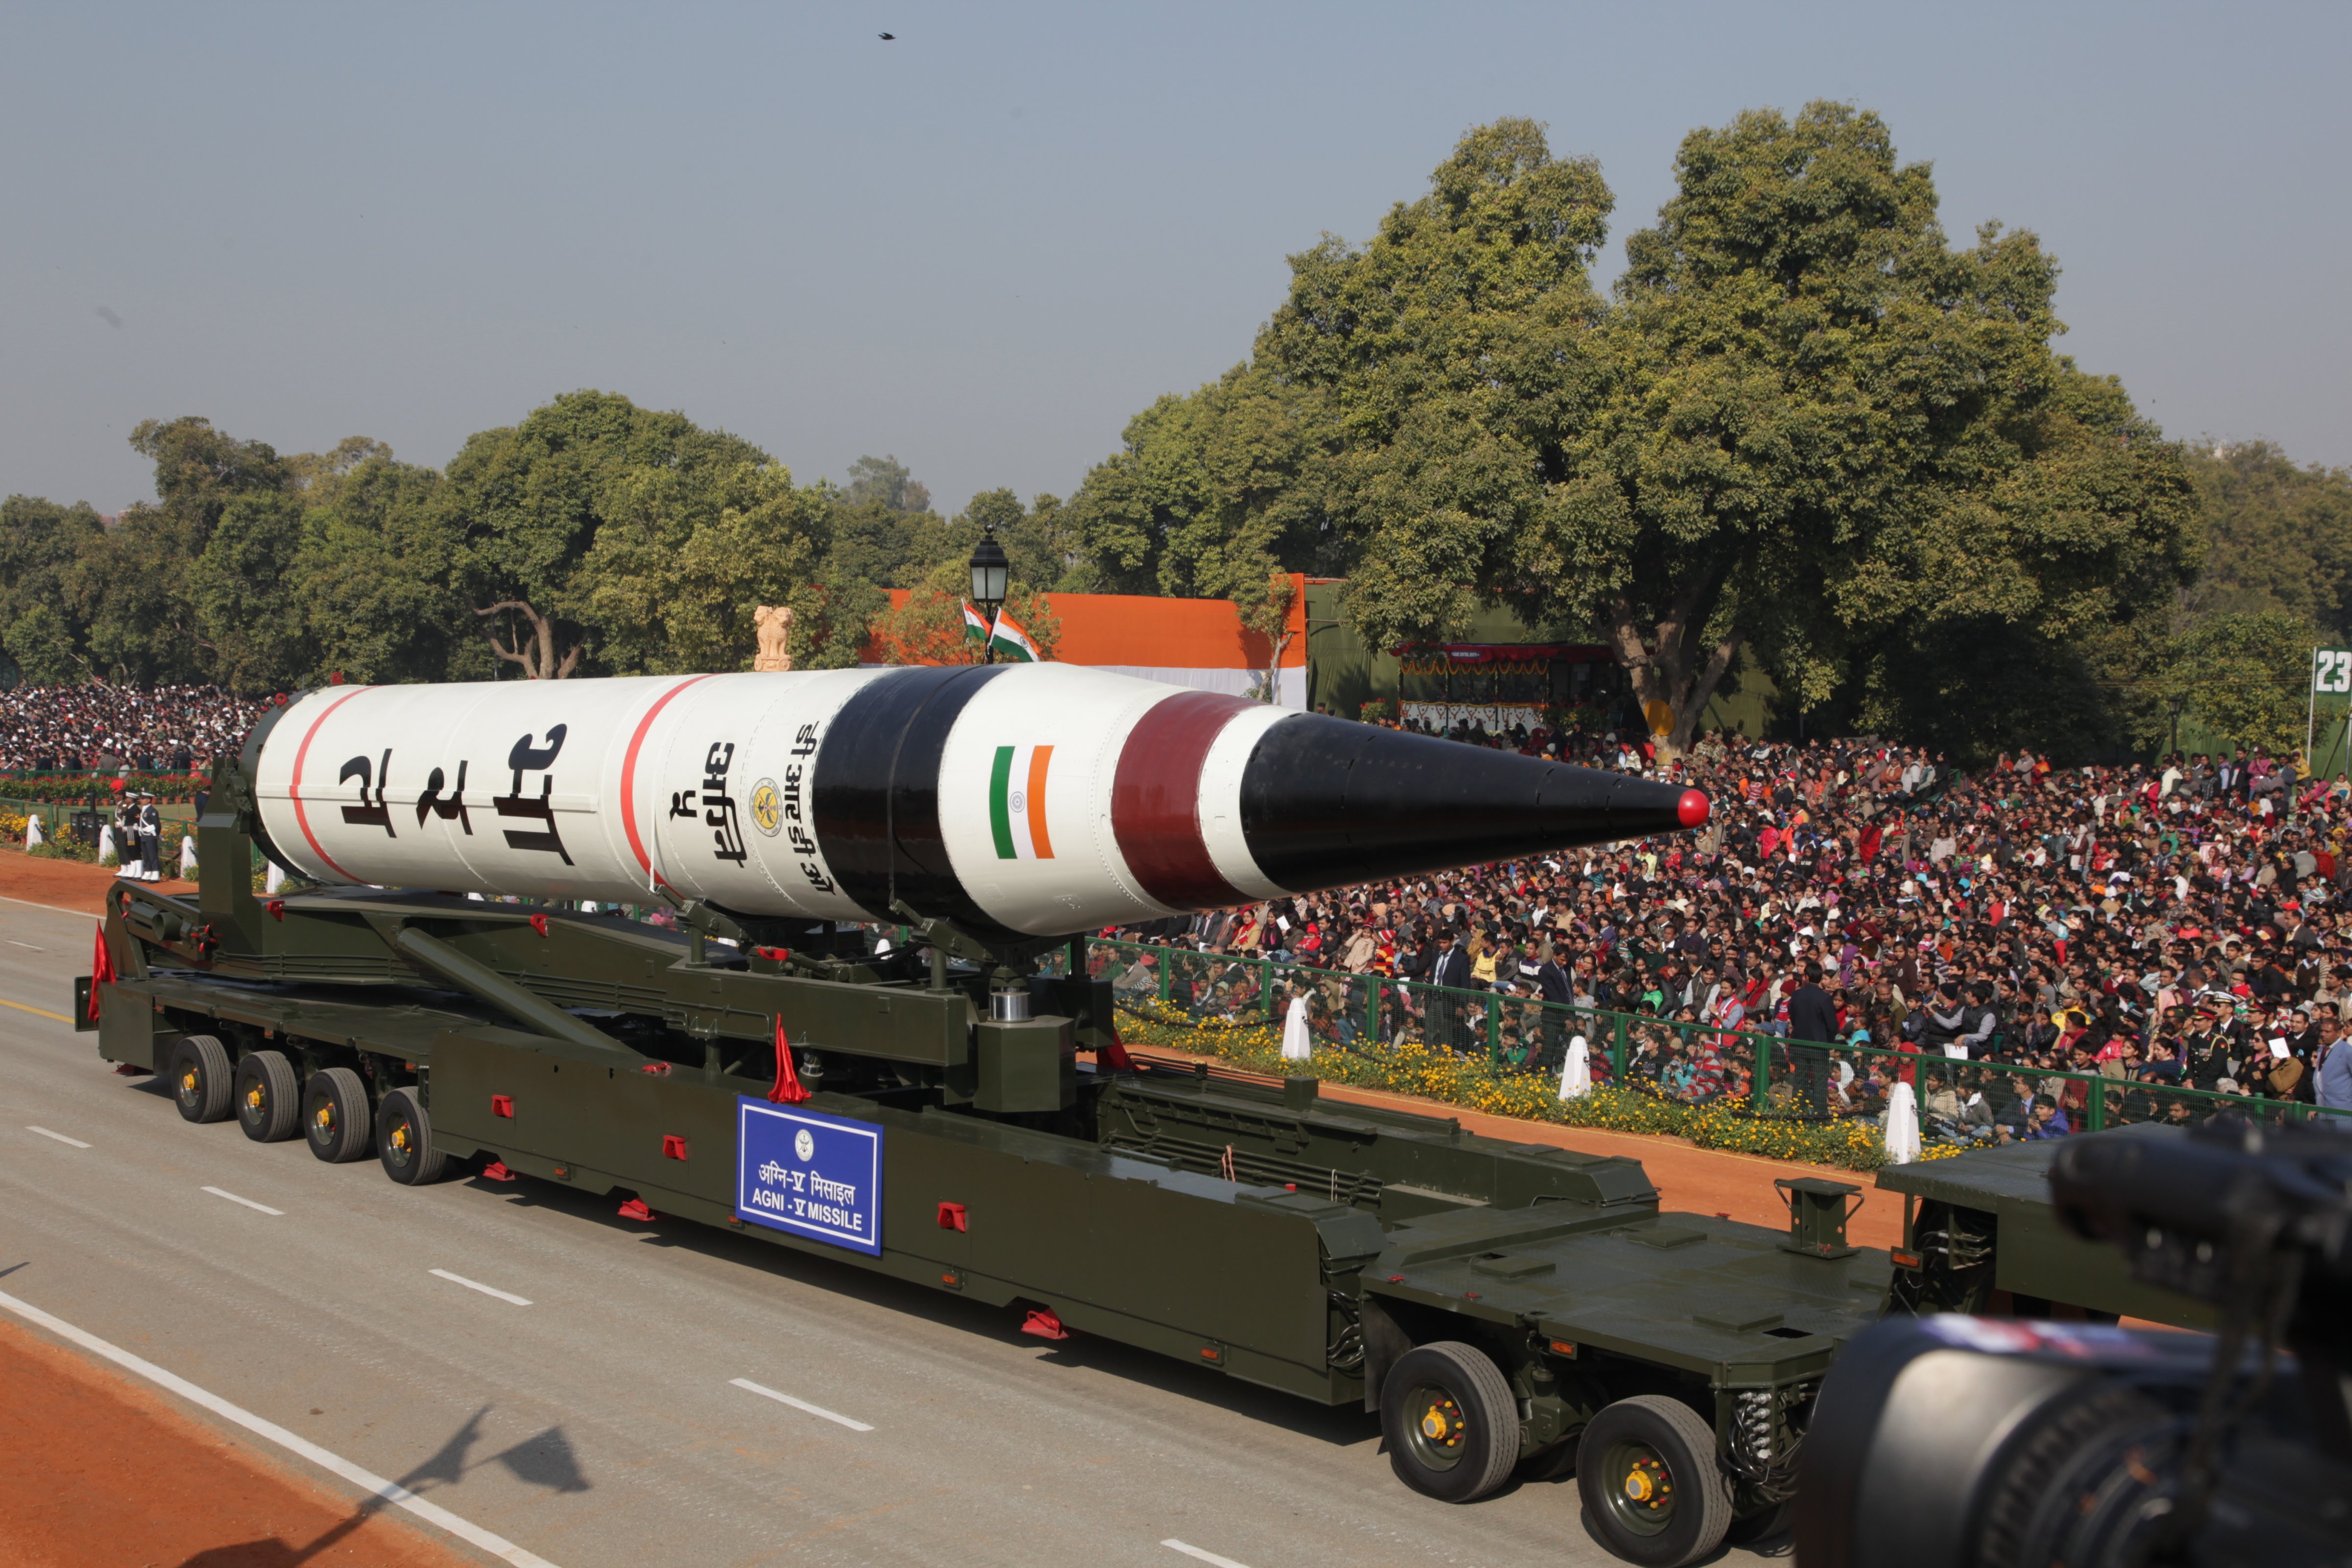 India's military prowess on display